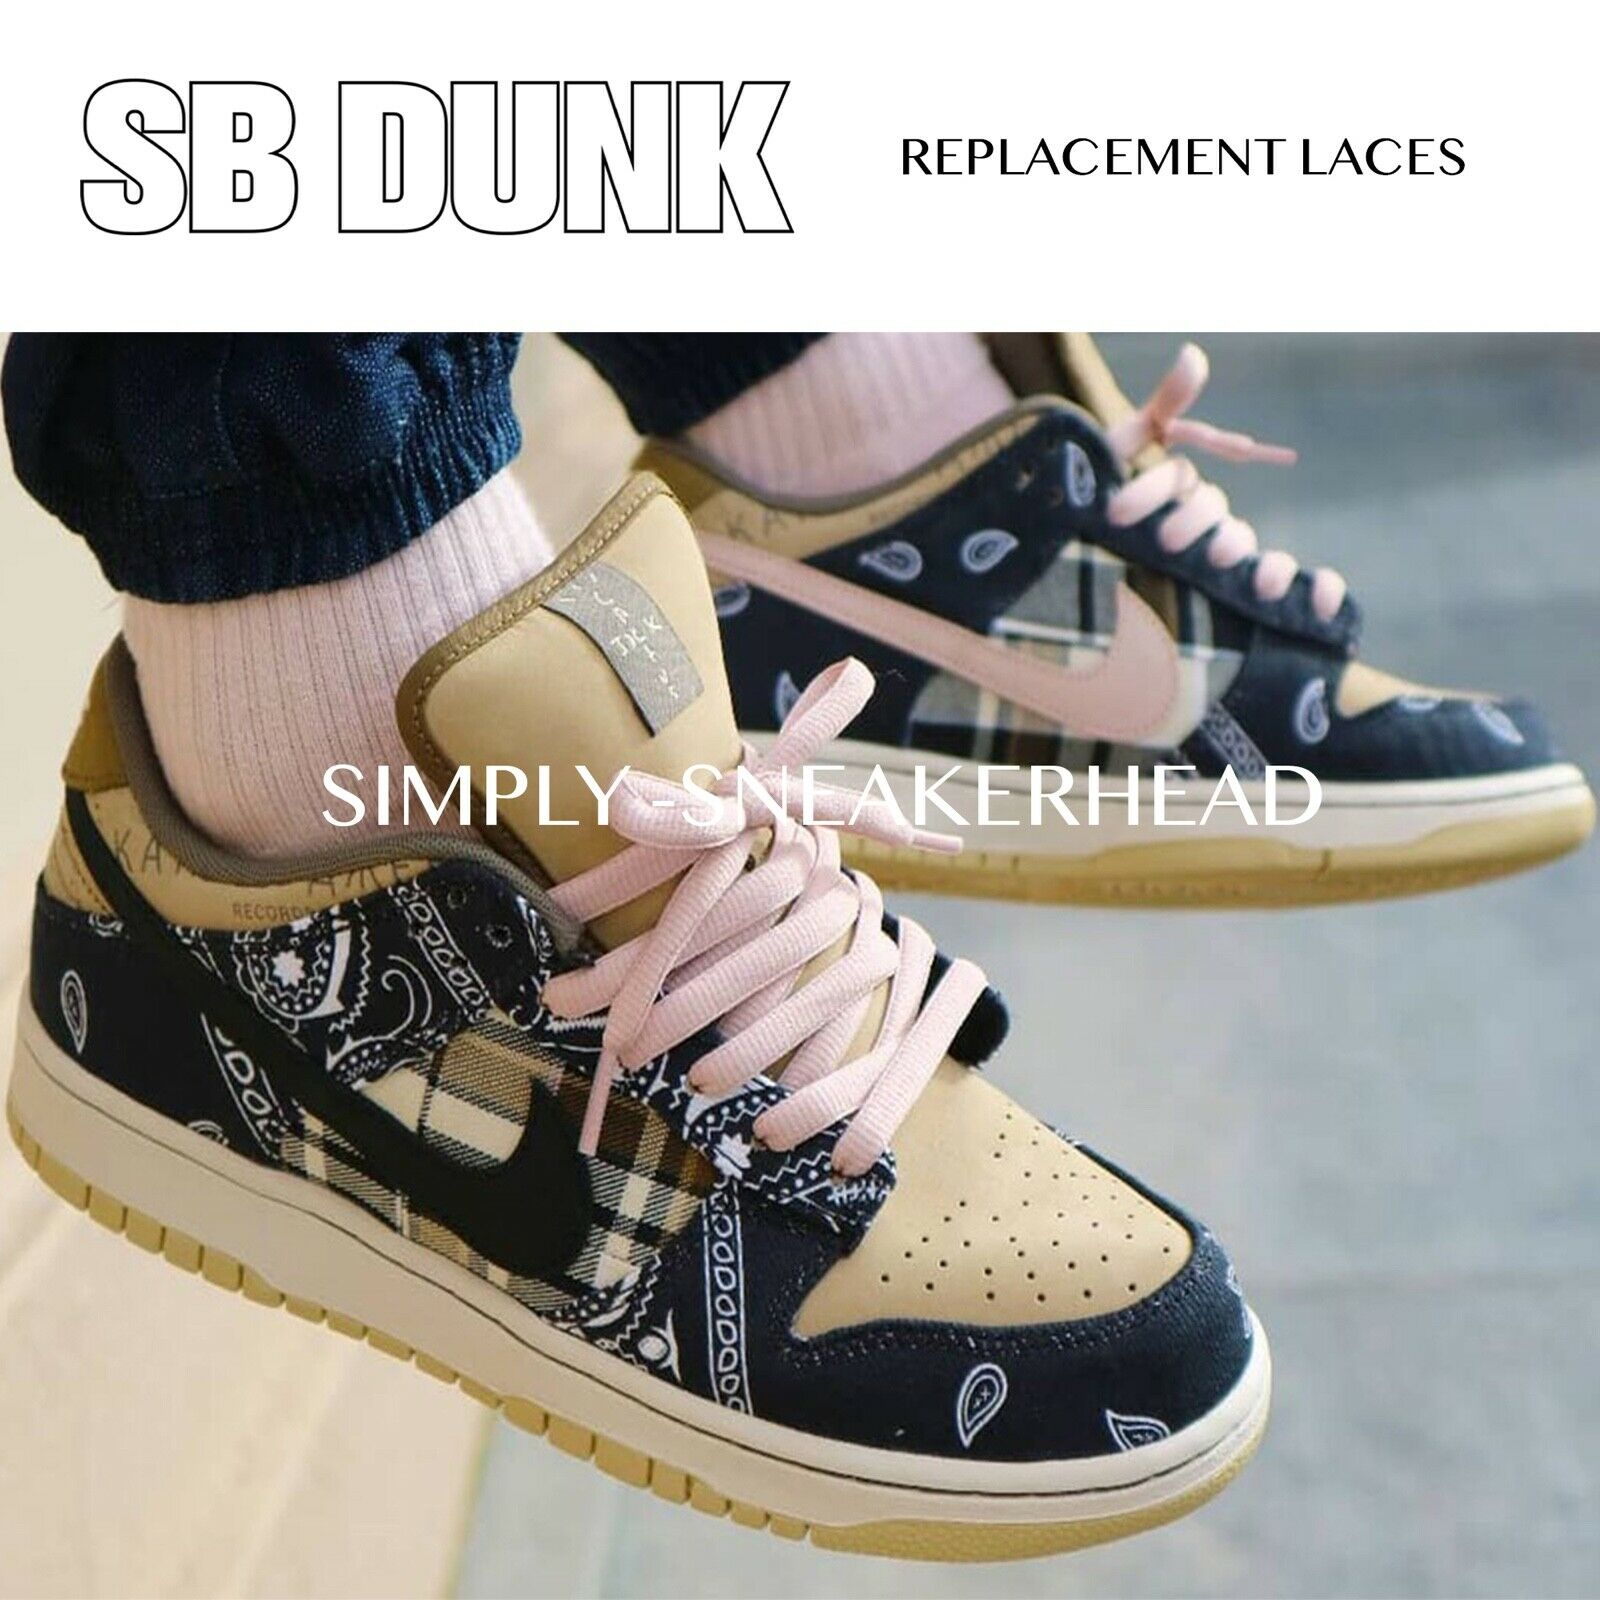 New Oval Sb Dunk Replacement Shoelaces Nike Dunk Laces High Low Skateboarding